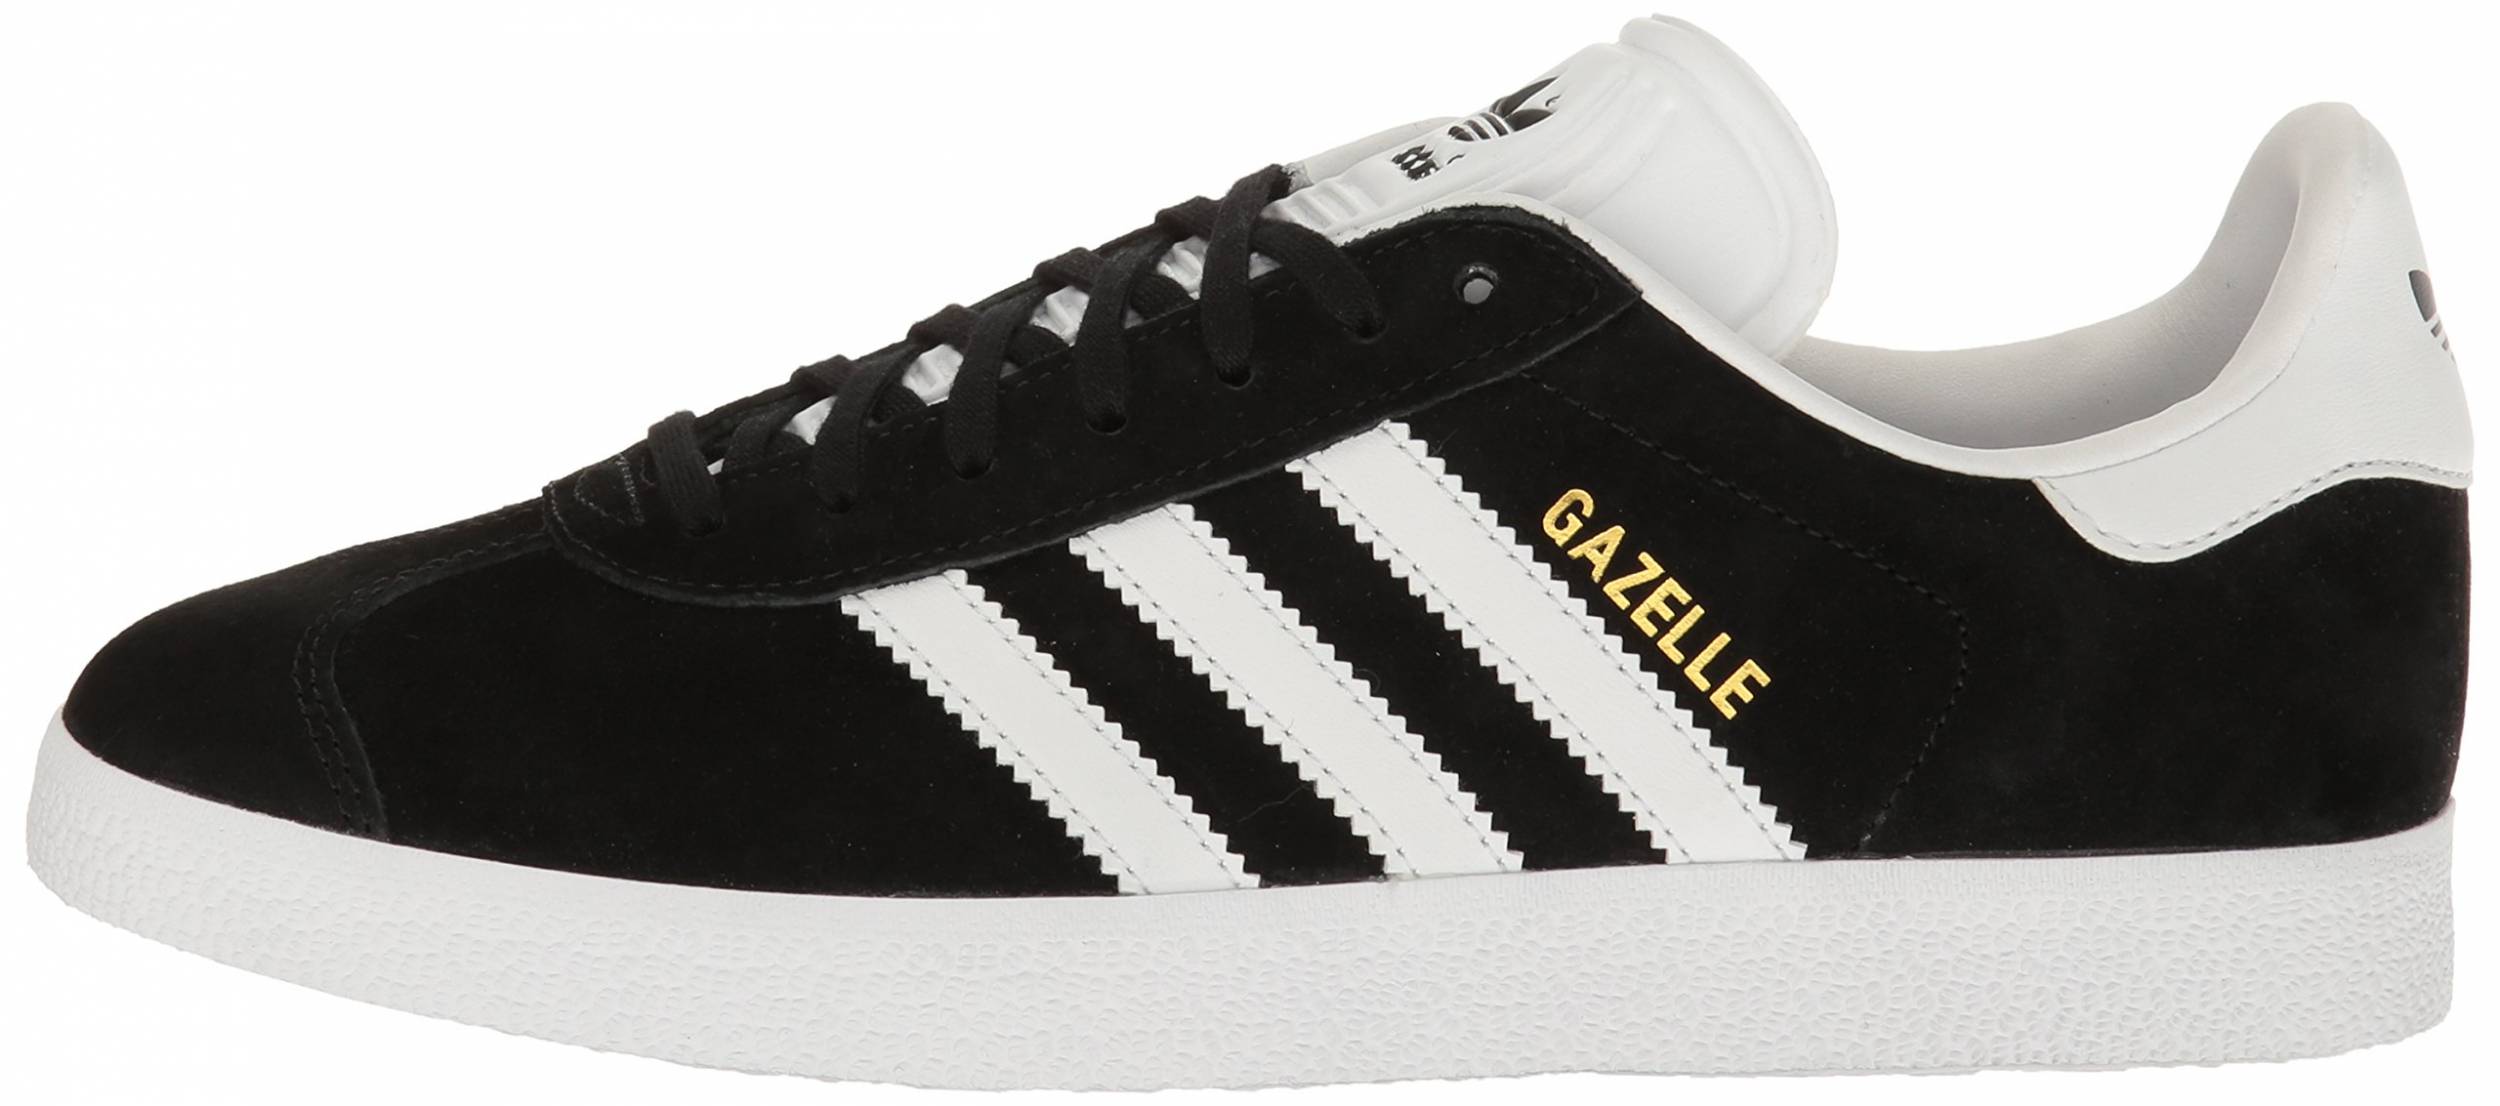 Adidas Gazelle sneakers in 50+ colors (only $30) |